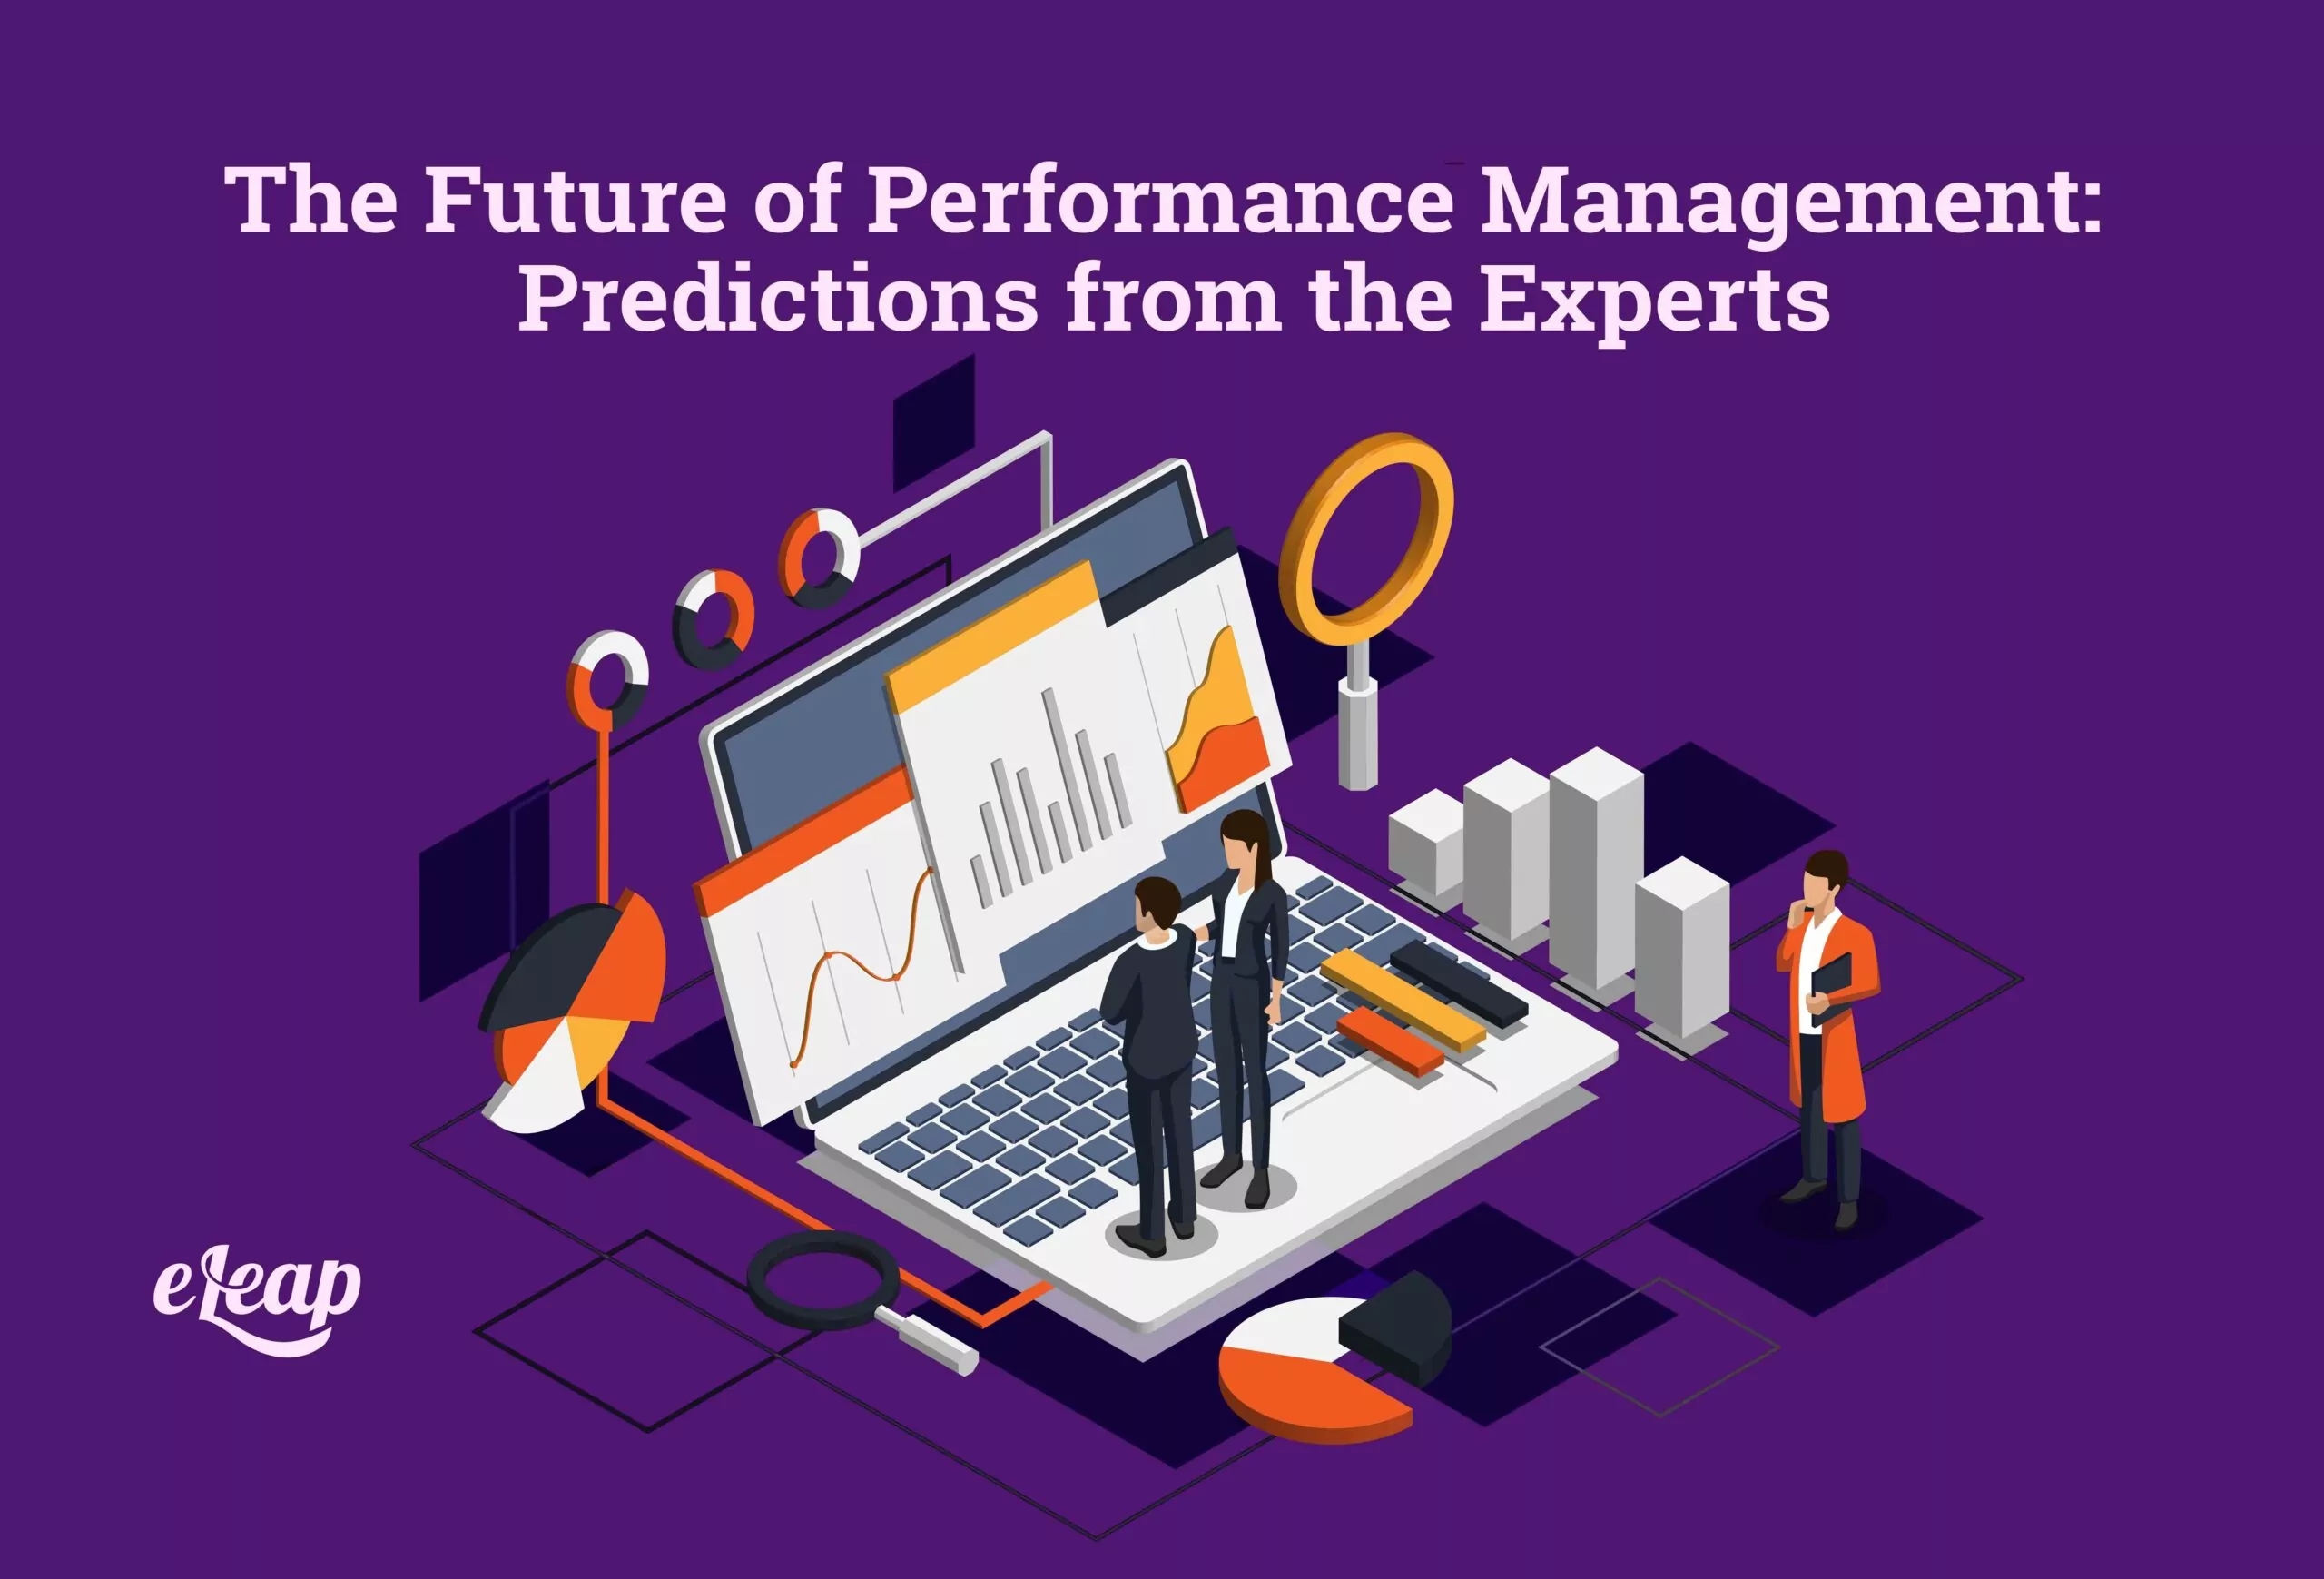 The Future of Performance Management: Predictions from the Experts